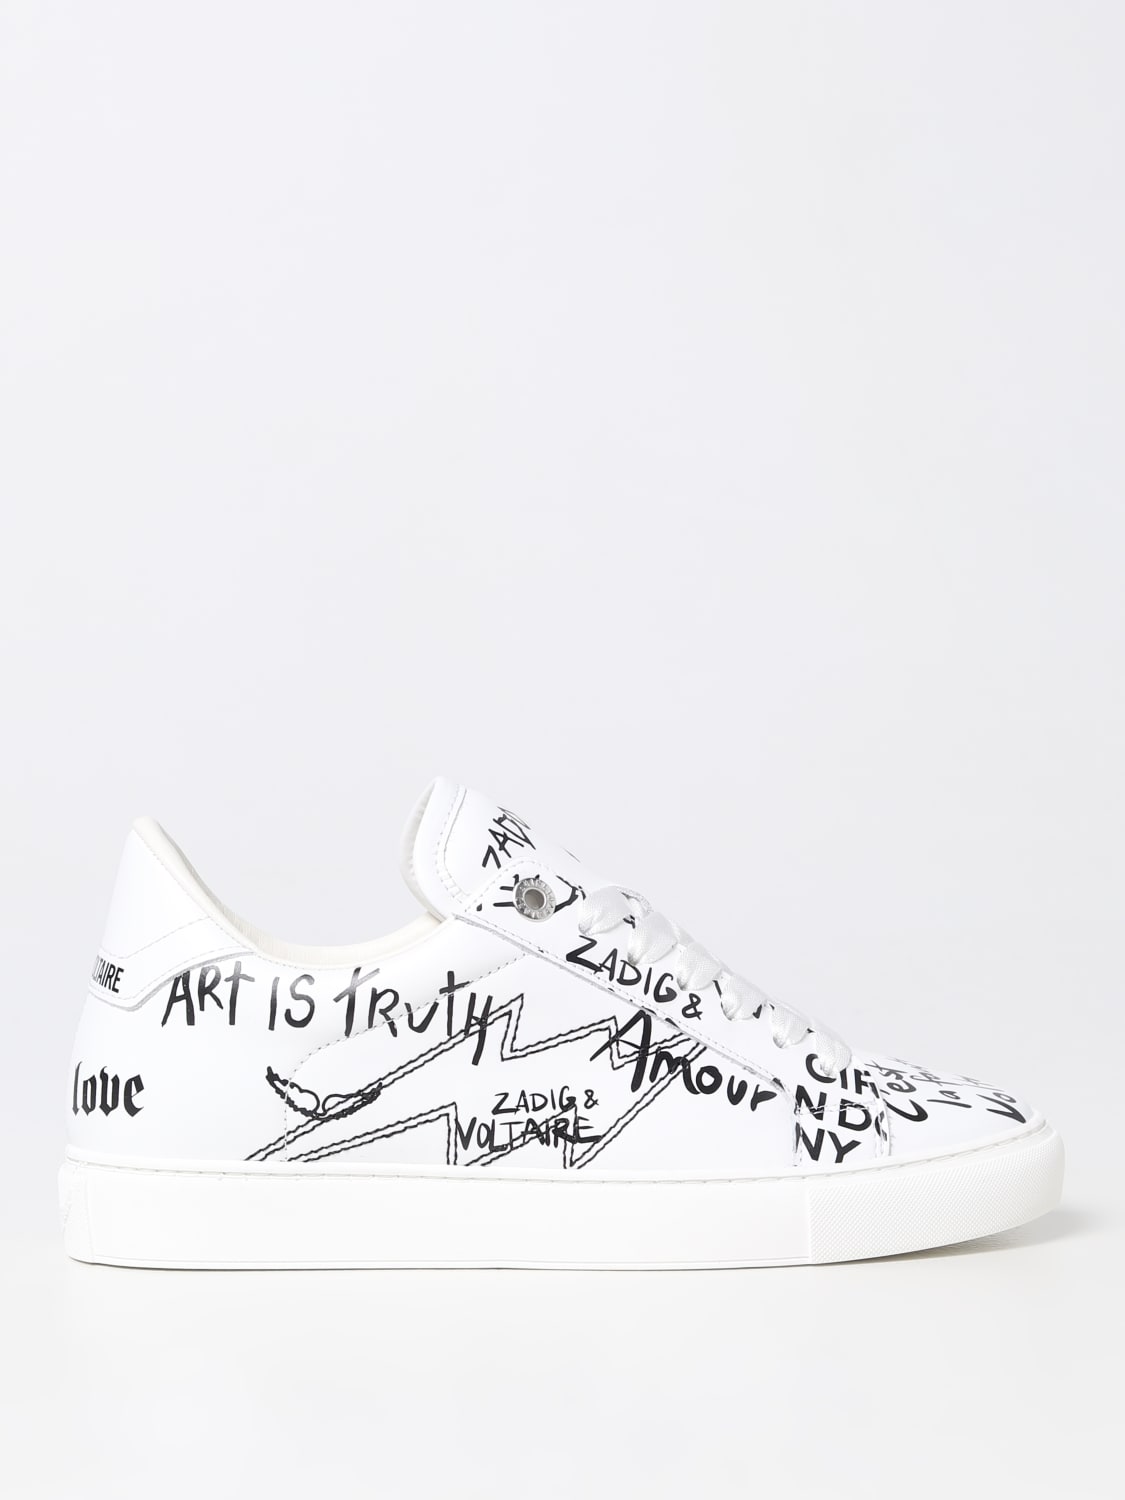 ZADIG & VOLTAIRE: sneakers for Zadig Voltaire - at SWSN00443 woman White & online sneakers 